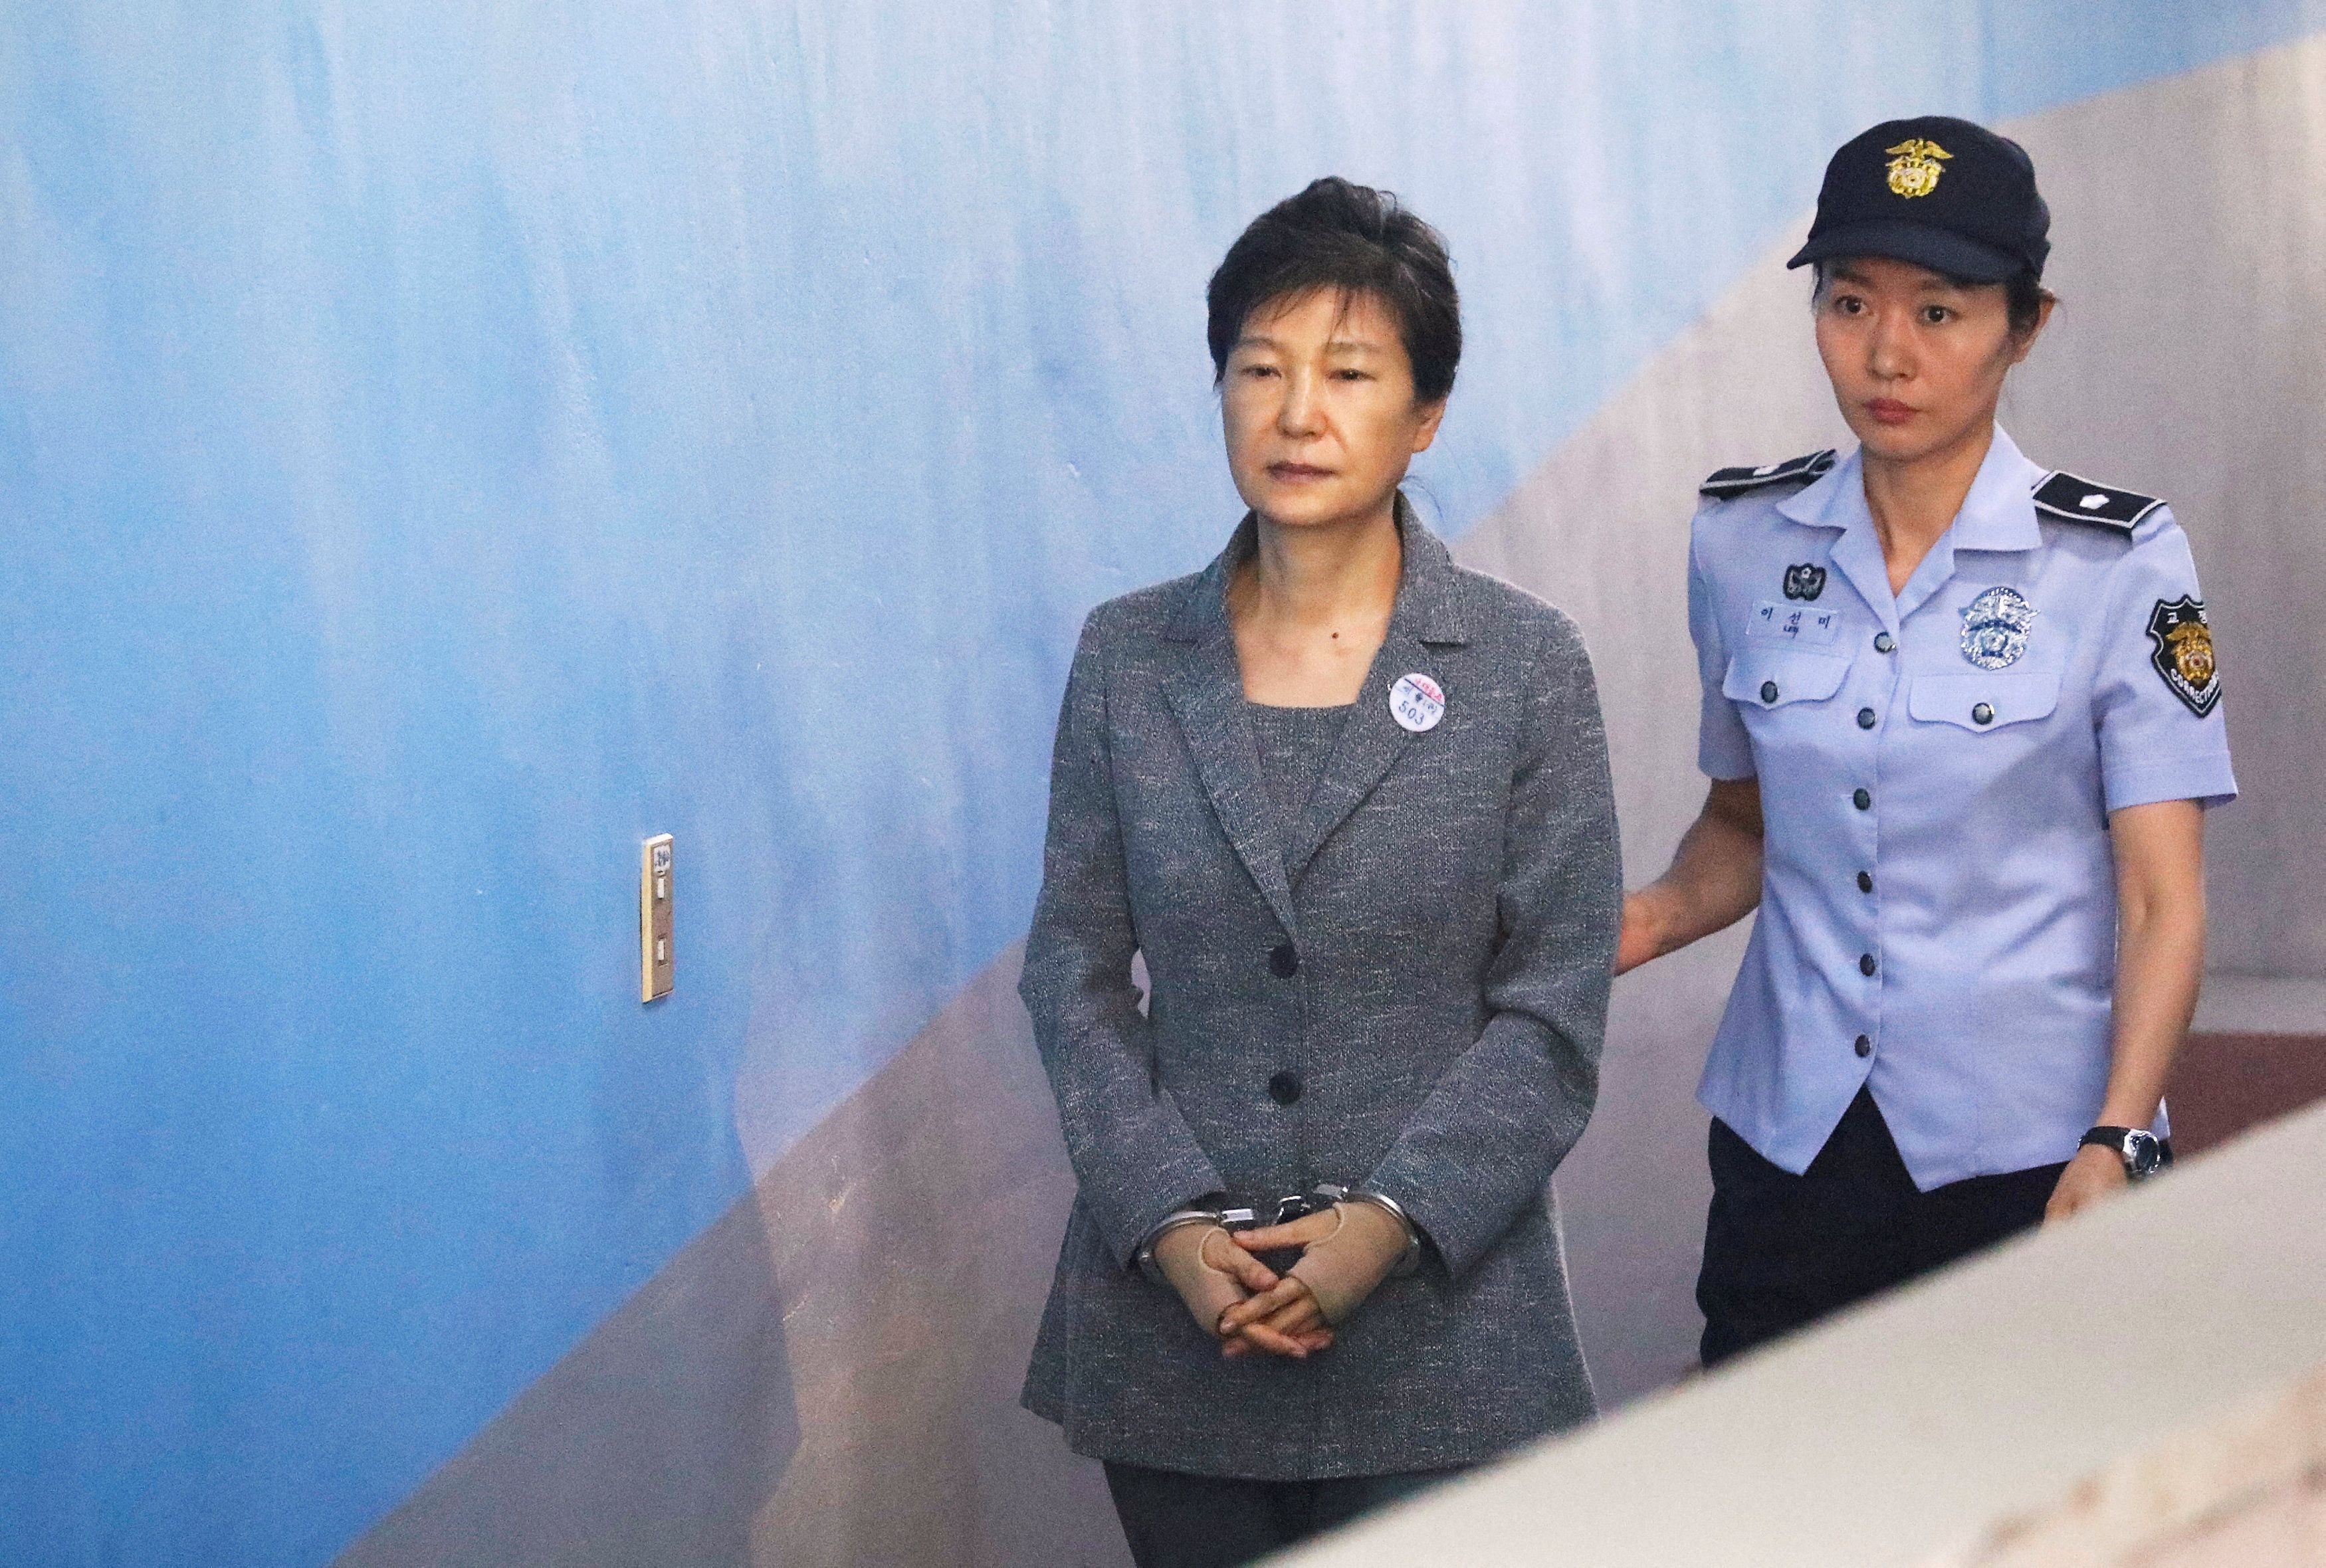 S.Korea's disgraced ex-president Park freed after nearly 5 years in prison